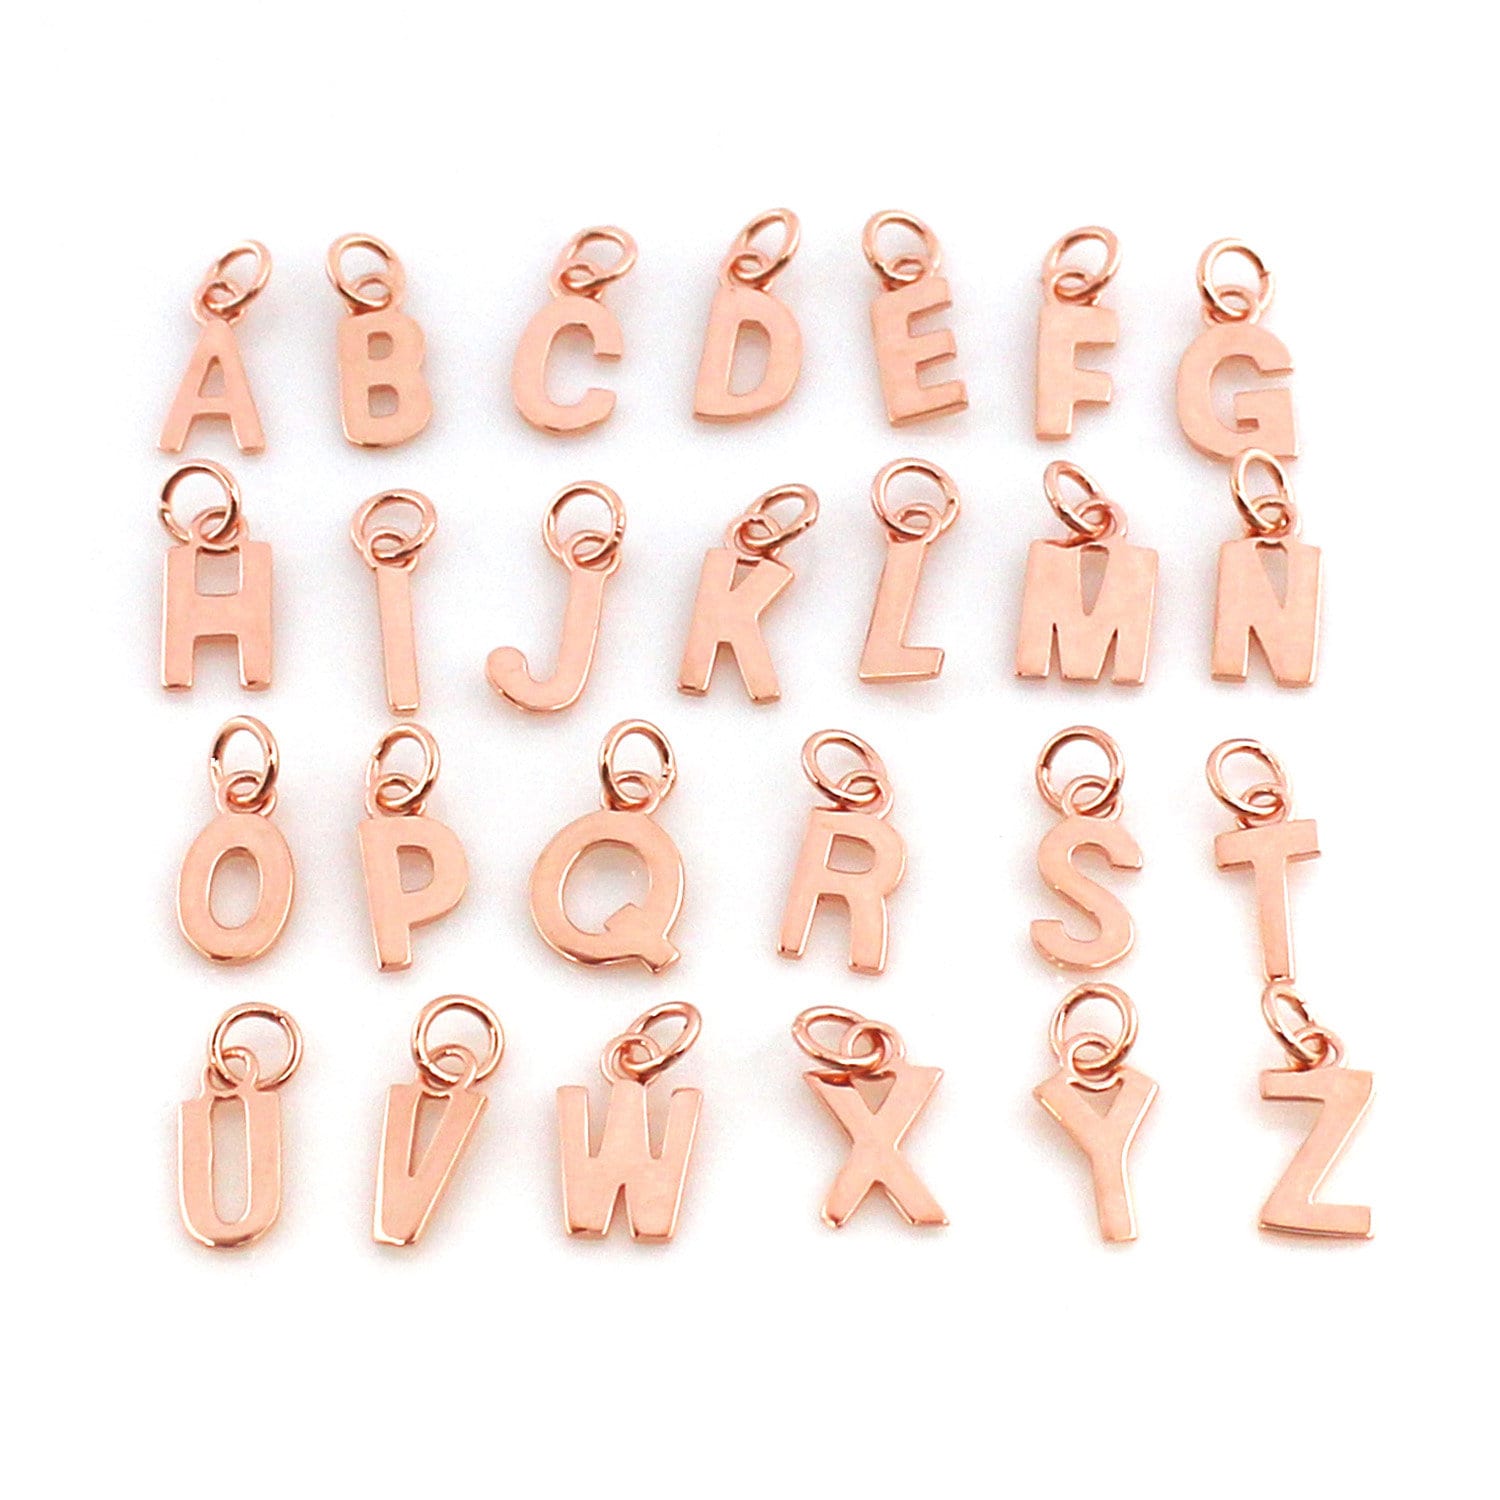 14K Cursive Letter Charms with Cubic Zirconium, A to Z Initial Letter Pendant for Jewelry Making, Letter Charms for Necklaces